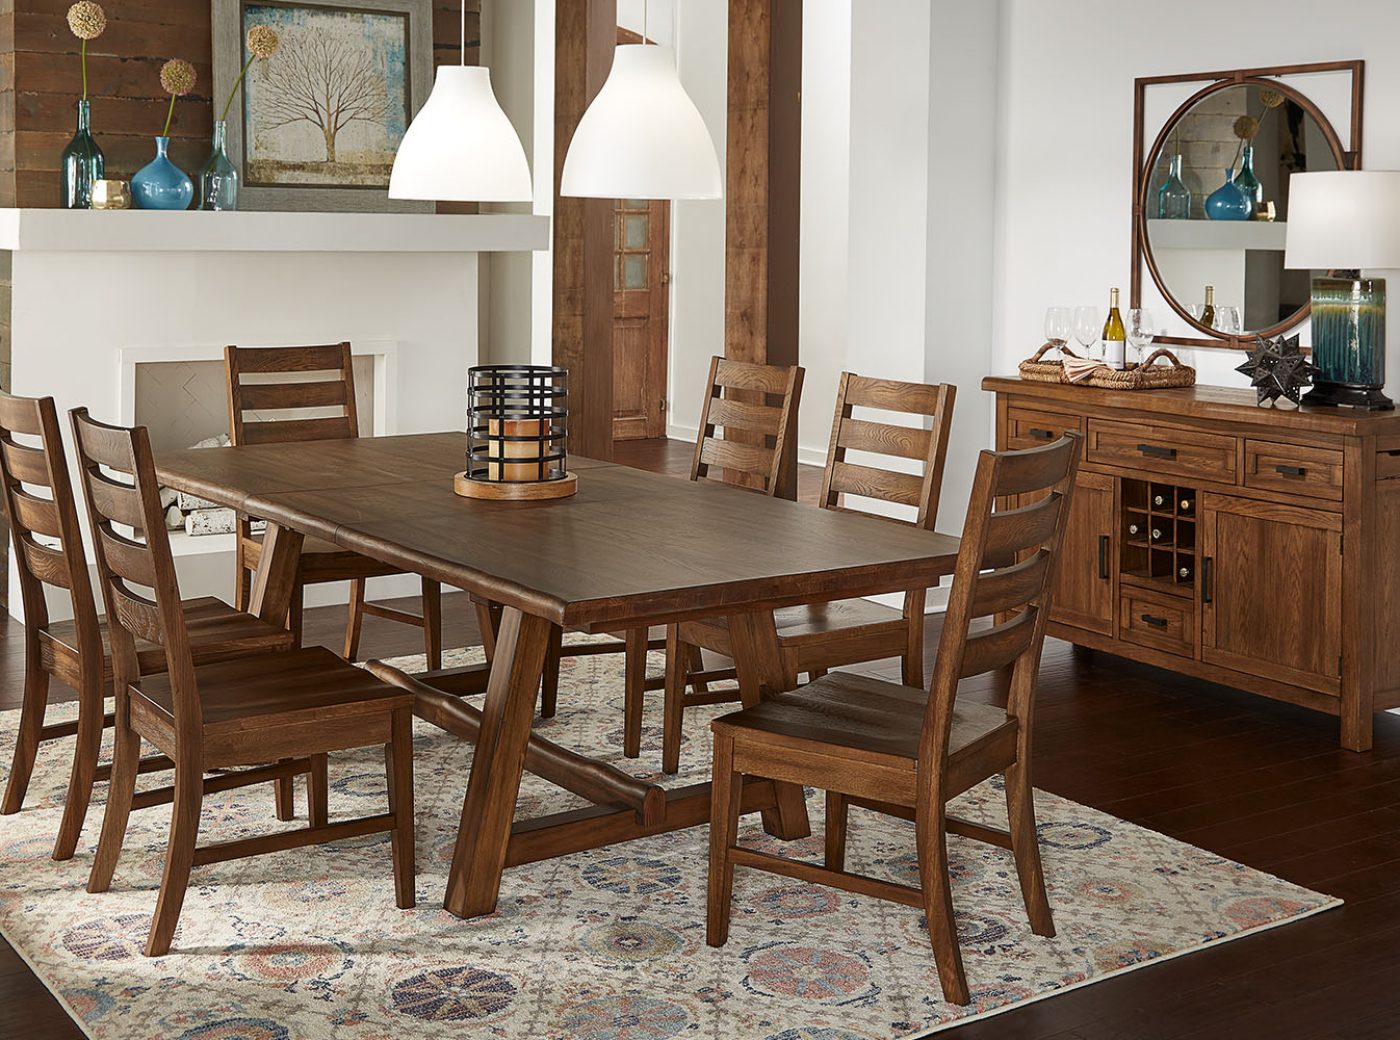 Broyhill Dining Room Set Cane Back Chairs